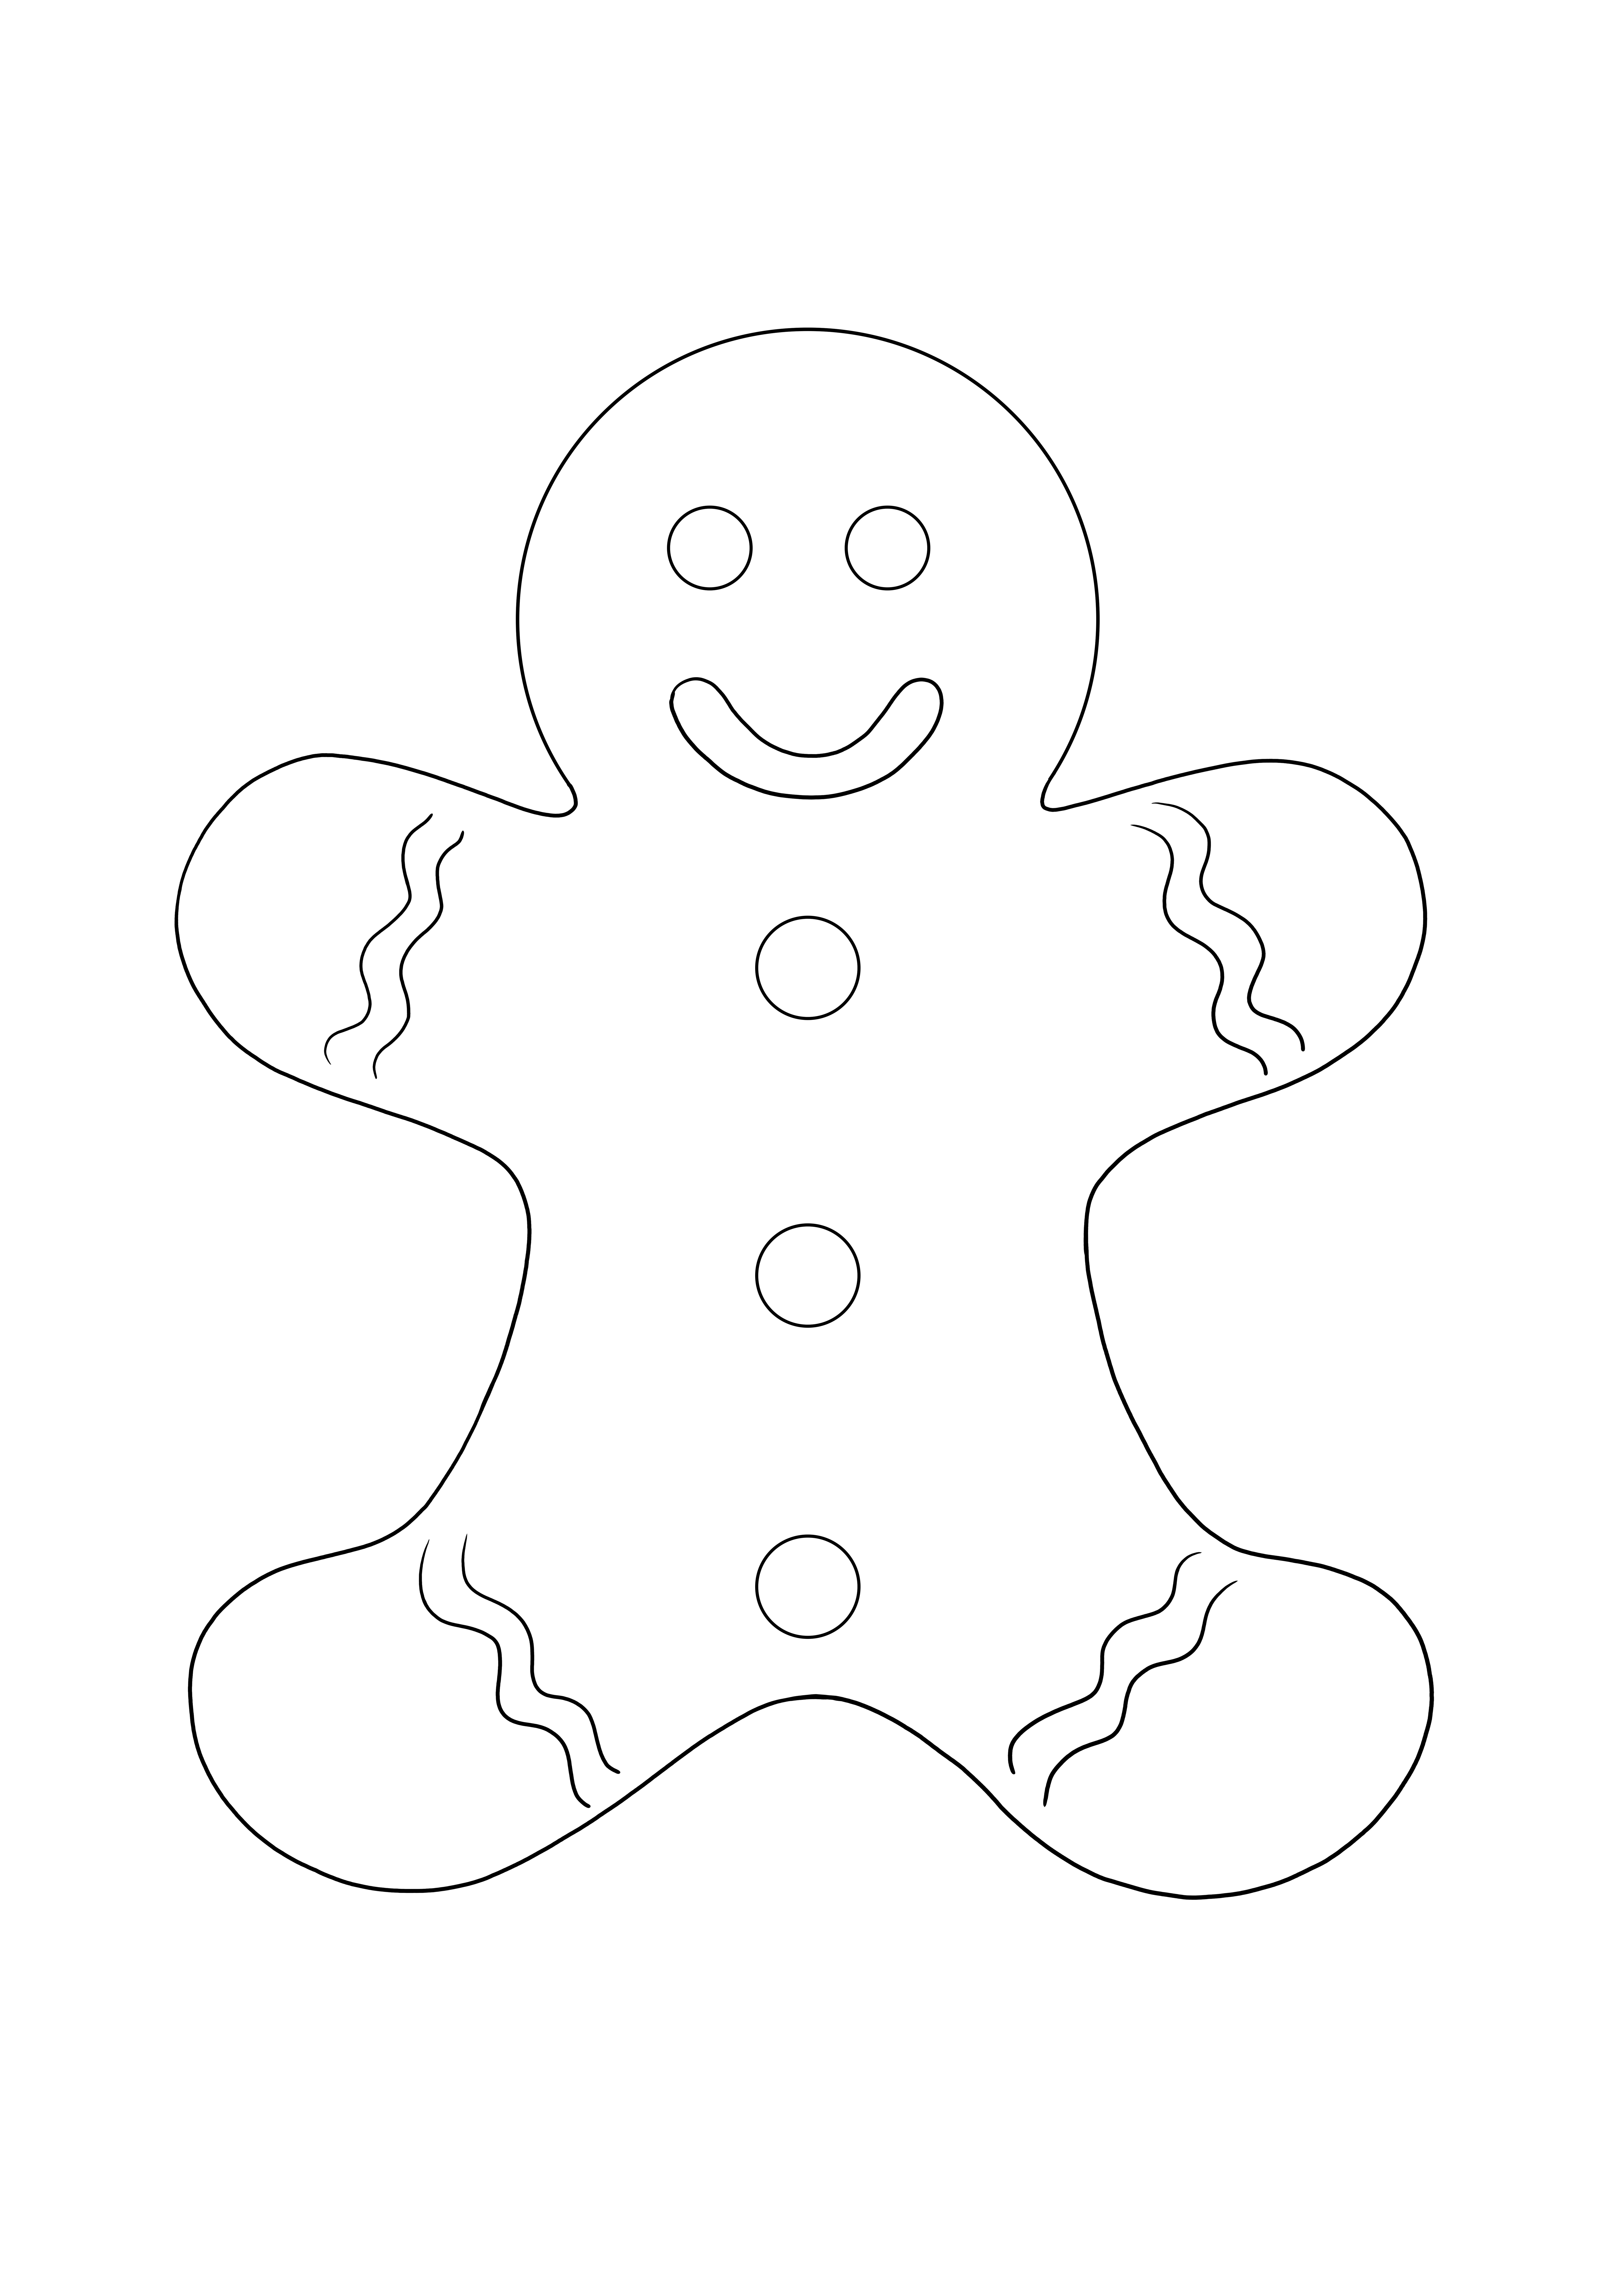 Christmas Gingerbread Man simple to color and free to download image